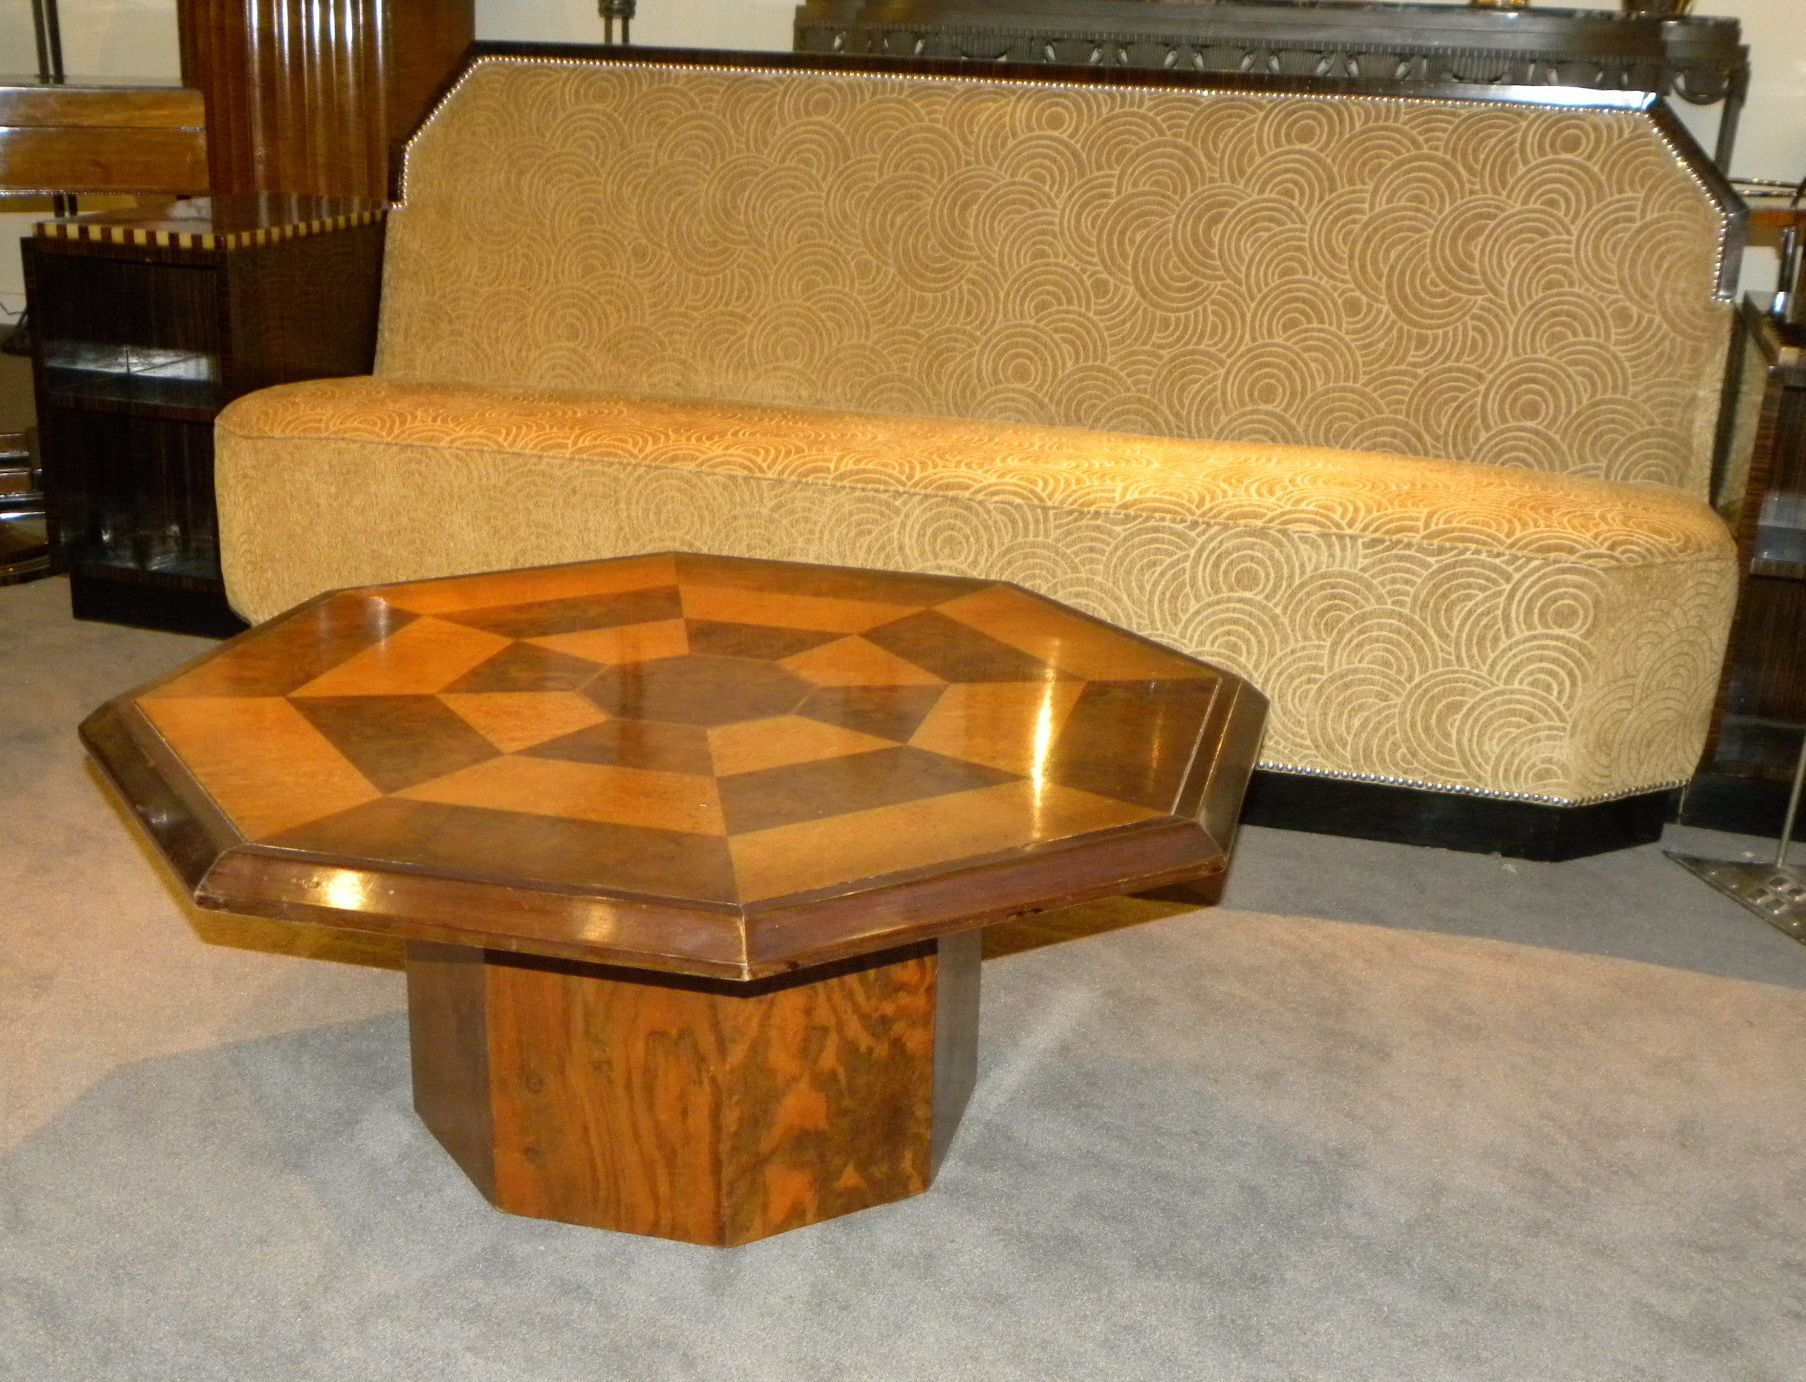 Original Two Tone Octagon Coffee Table | Small Tables Throughout Octagon Console Tables (View 4 of 20)